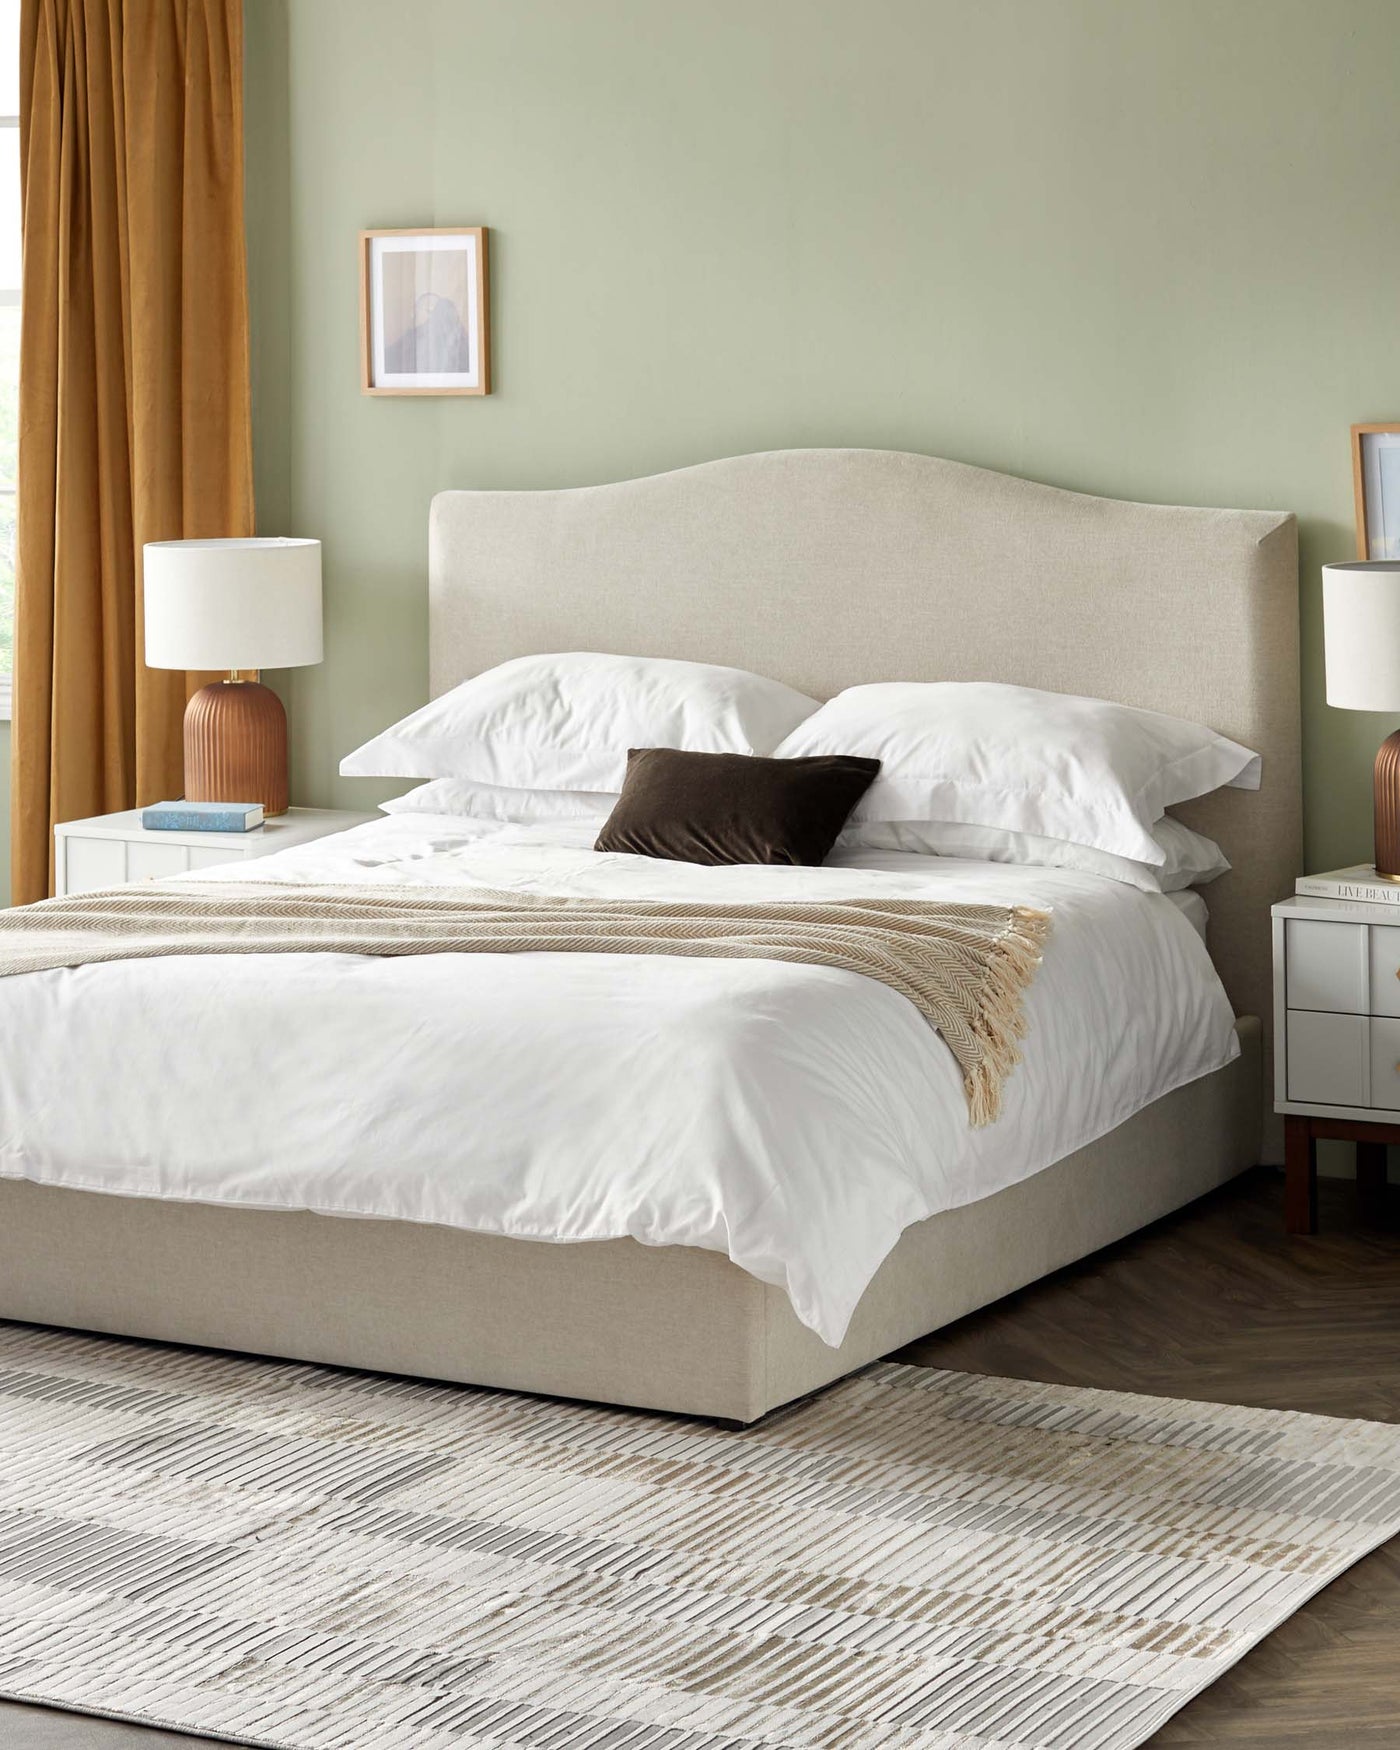 A contemporary bedroom featuring a large upholstered bed with a curved headboard, flanked by two matching white nightstands with drawer storage. The nightstands are adorned with modern table lamps with cylindrical shades and a wooden base. A textured area rug is positioned underneath the bed.